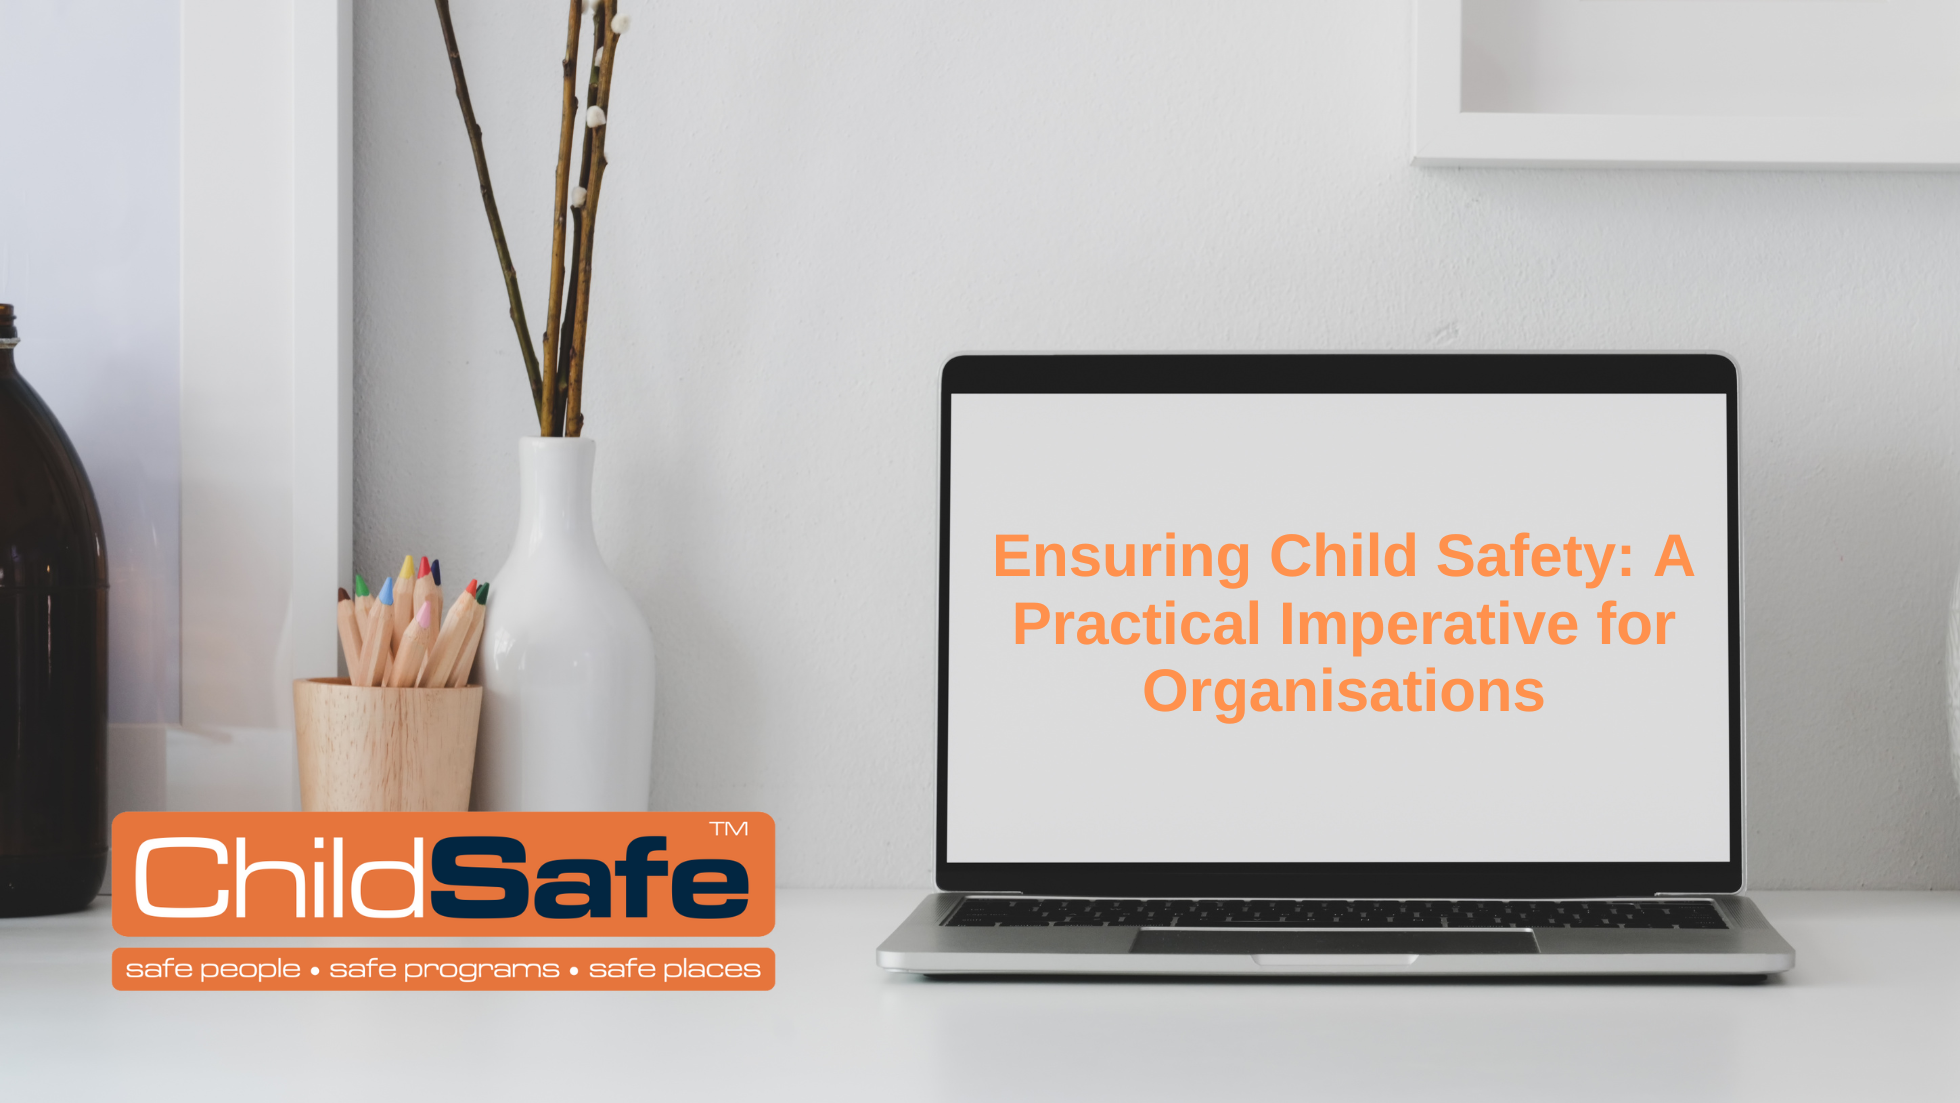 Ensuring Child Safety: A Practical Imperative for Organisations